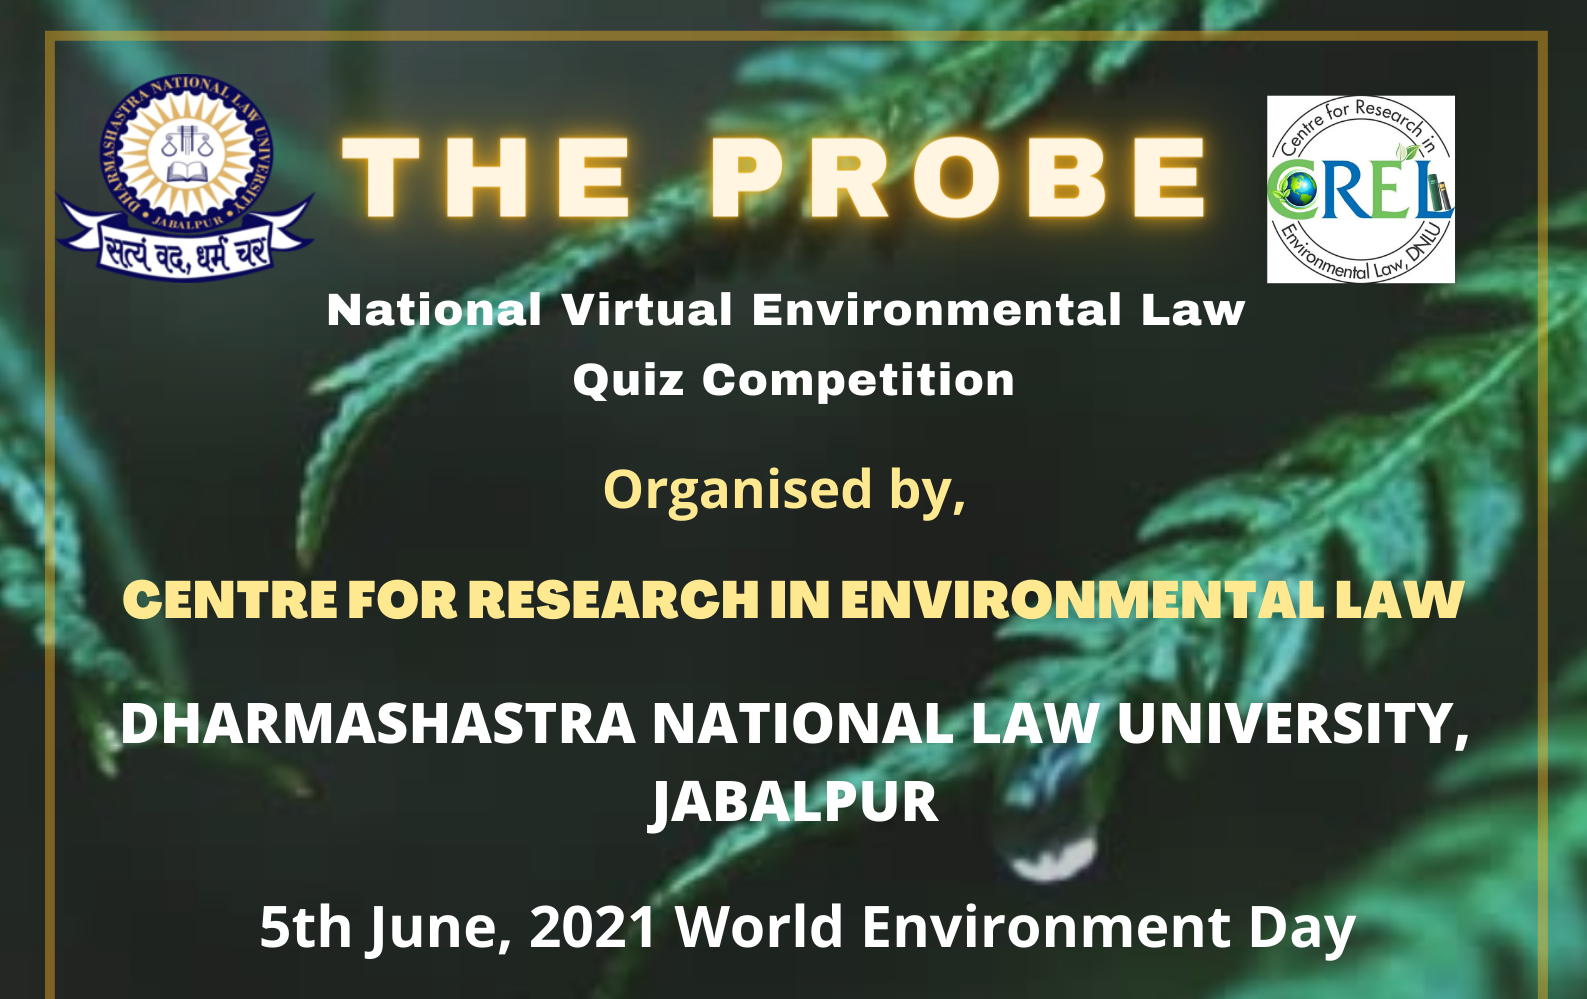 “The Probe” National Virtual Environmental Law Quiz Competition, 2021